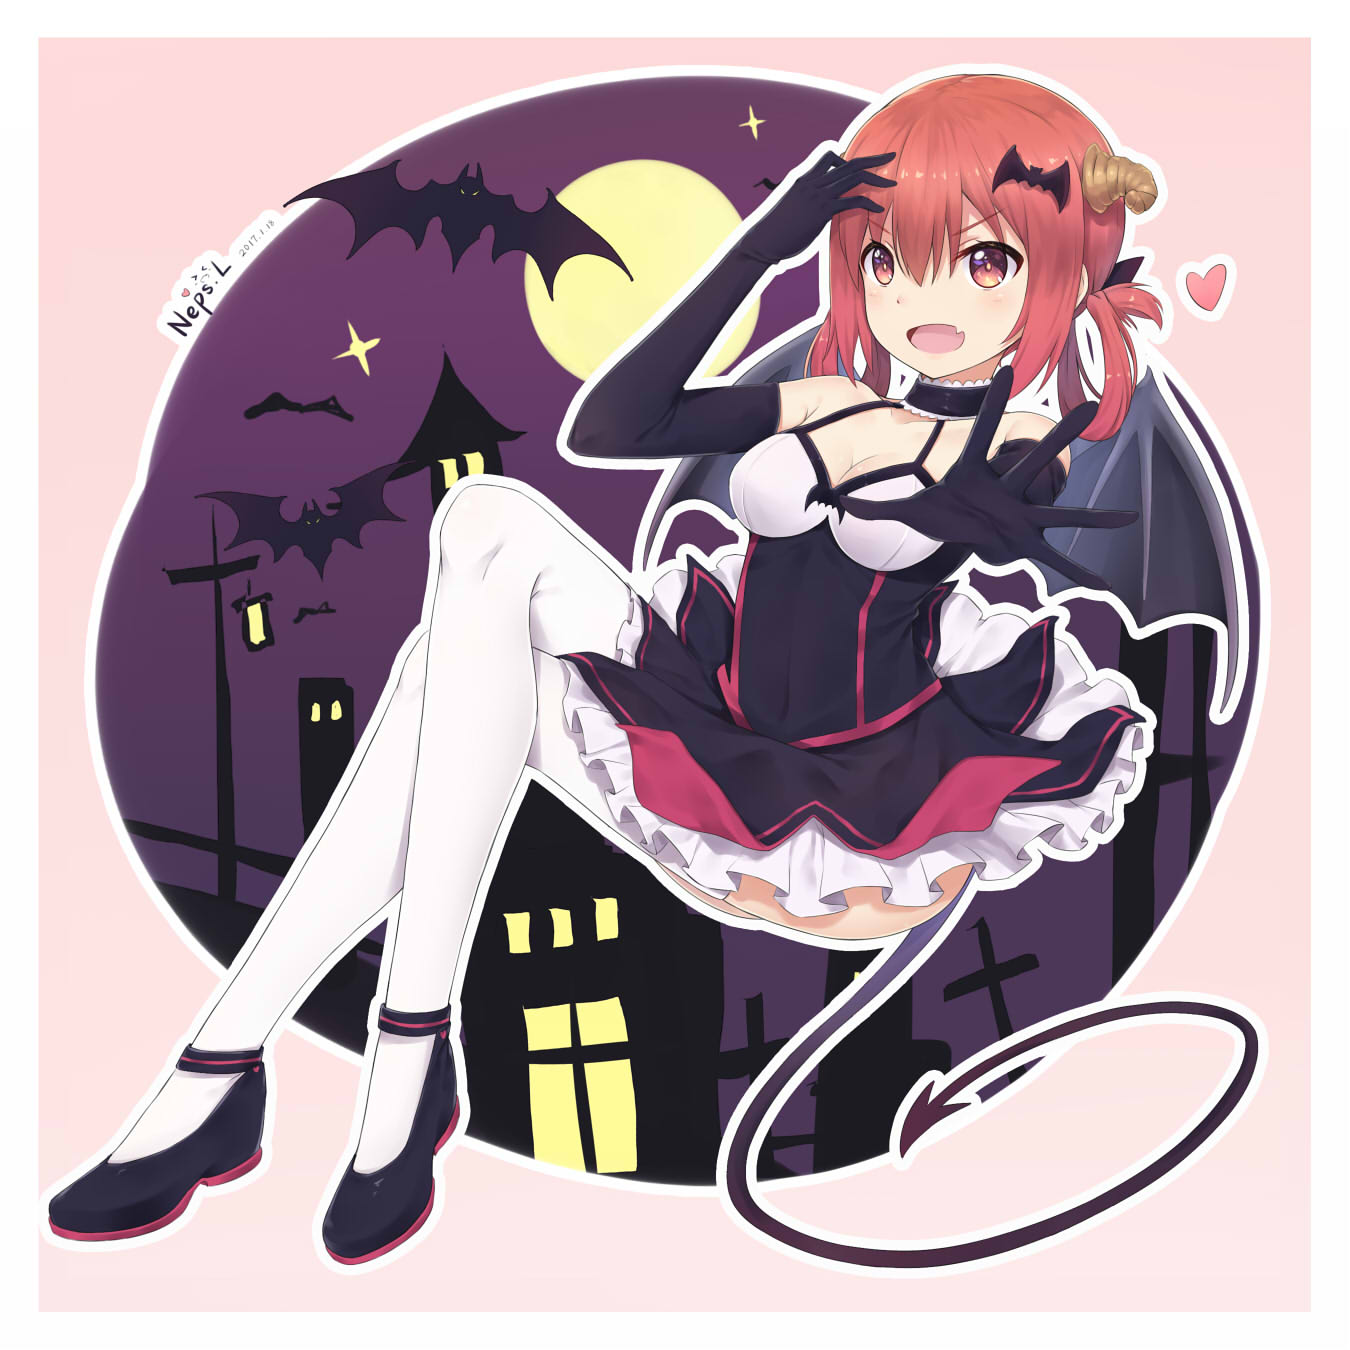 1girl 2017 alternate_costume artist_name bare_shoulders bat bat_hair_ornament black_gloves castle choker dated dress elbow_gloves fang frills full_body full_moon gabriel_dropout gloves hair_ornament hair_rings halloween highres invisible_chair kurumizawa_satanichia_mcdowell legs_crossed looking_at_viewer moon neps-l open_mouth outstretched_arm petticoat red_eyes redhead sitting solo thigh-highs white_legwear